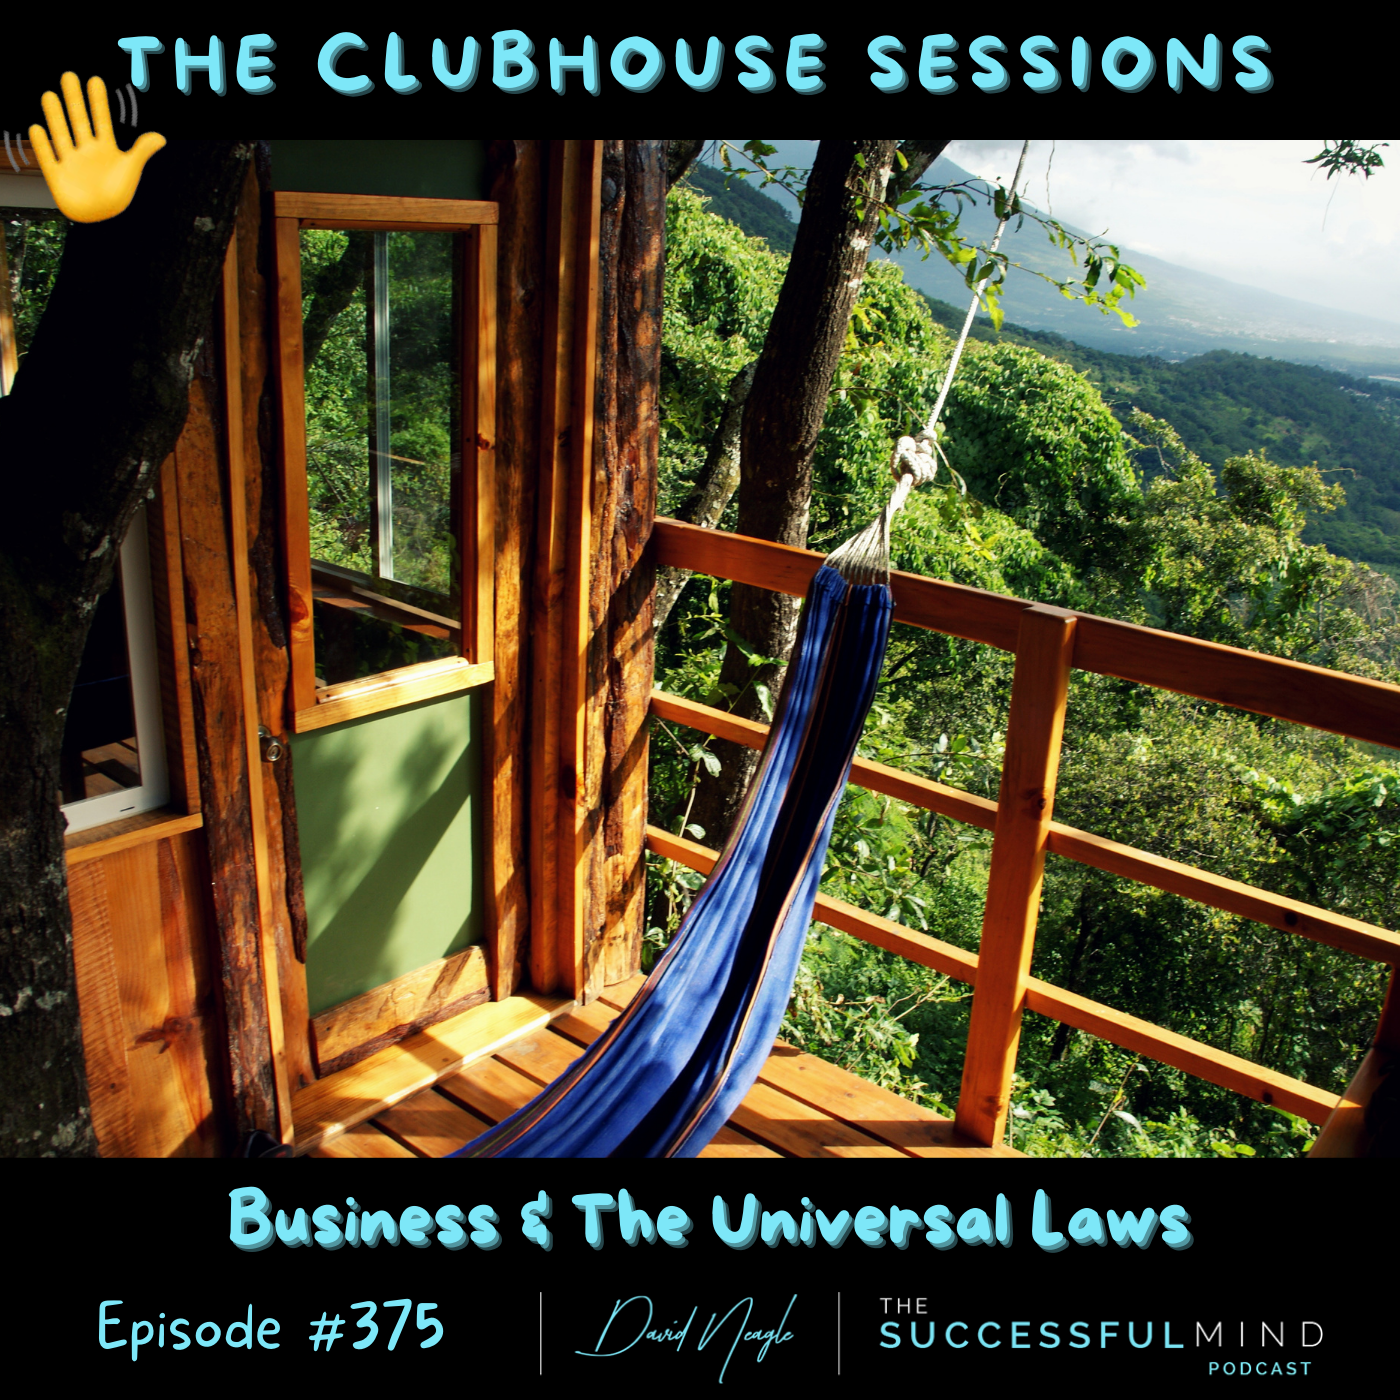 The Clubhouse Sessions - Business & The Universal Laws